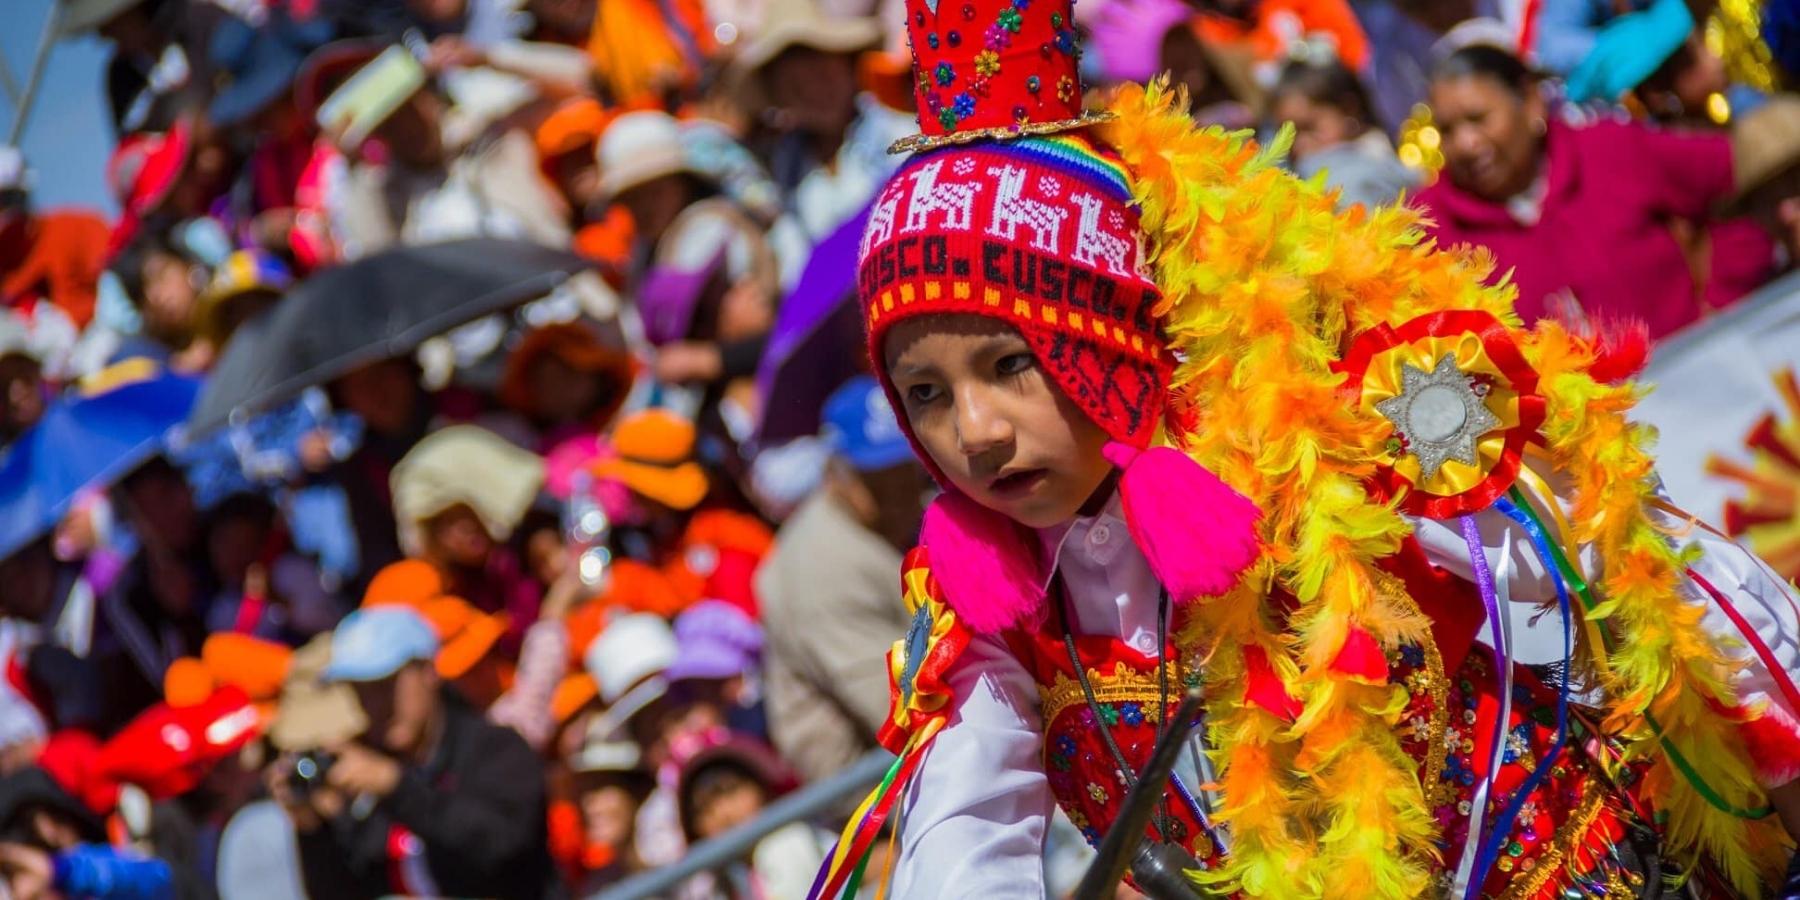 THE MOST IMPORTANT FESTIVALS IN CUSCO